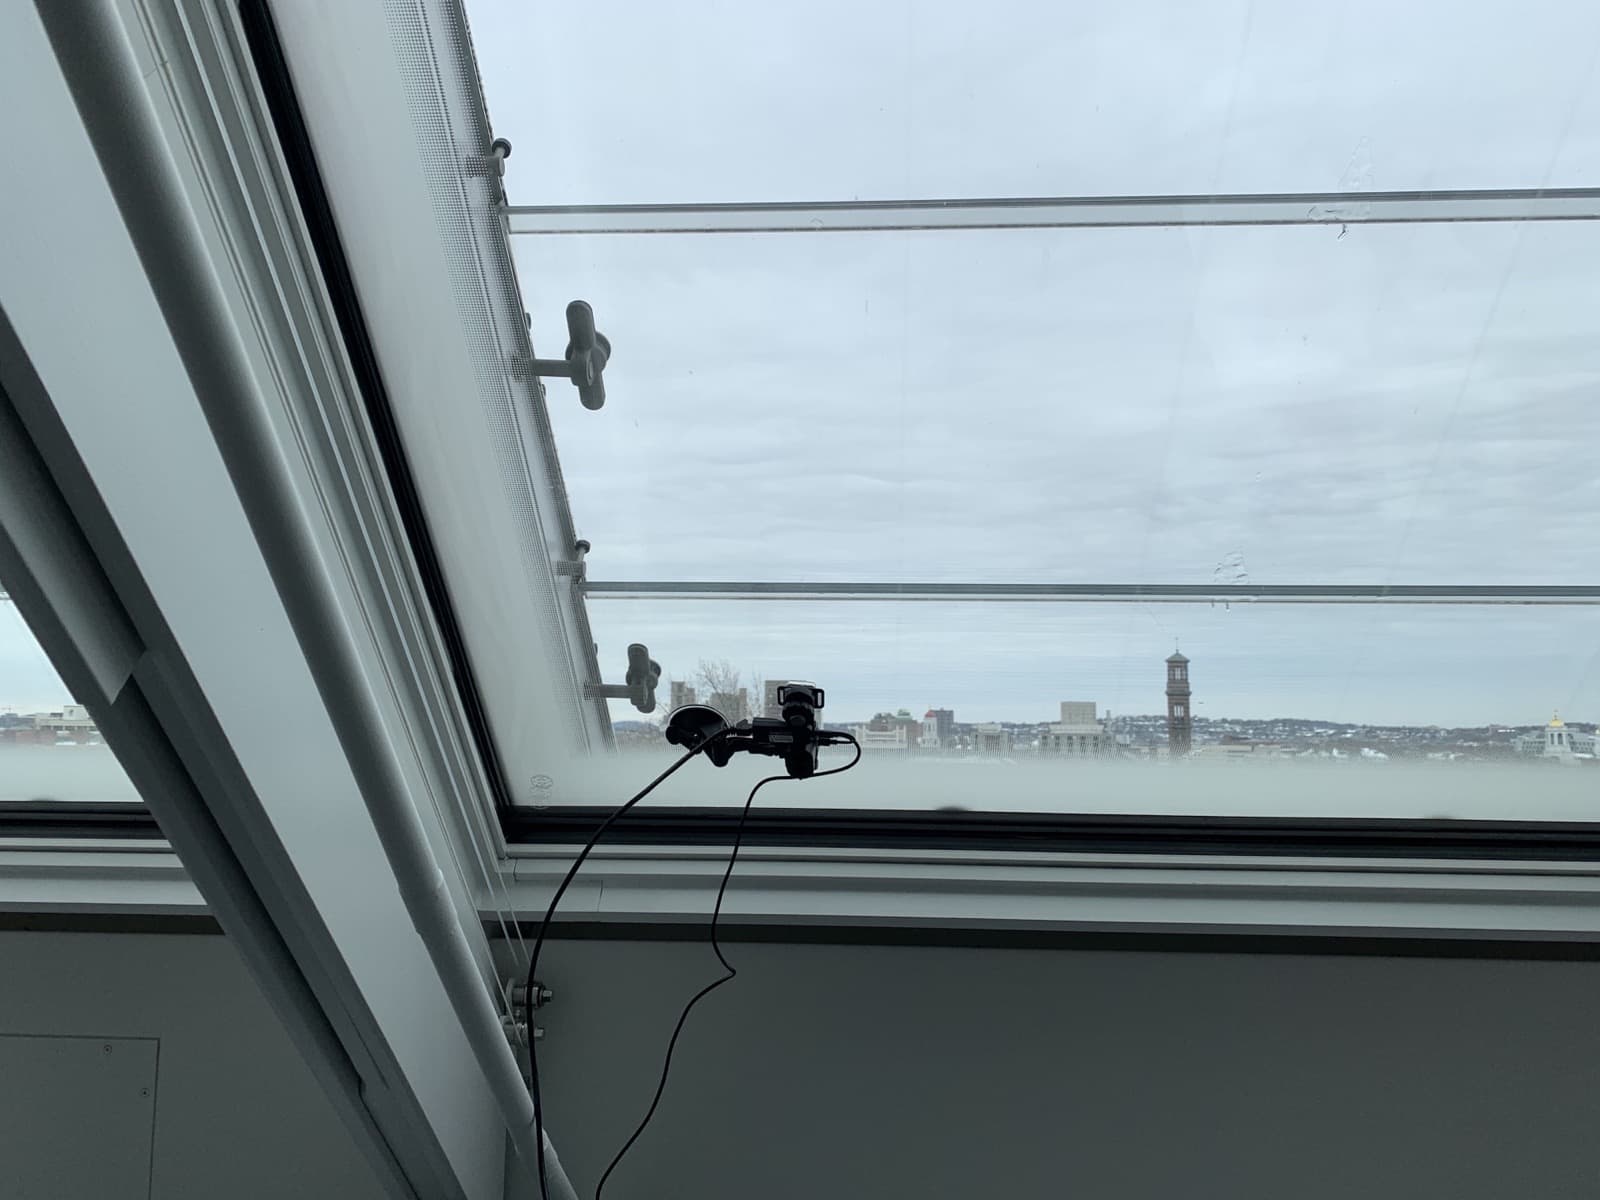 A photo of a small camera attached to a glass ceiling. Through the glass a skyline with a curchtower is visible. The sky is overcast in a pale, gray blue.